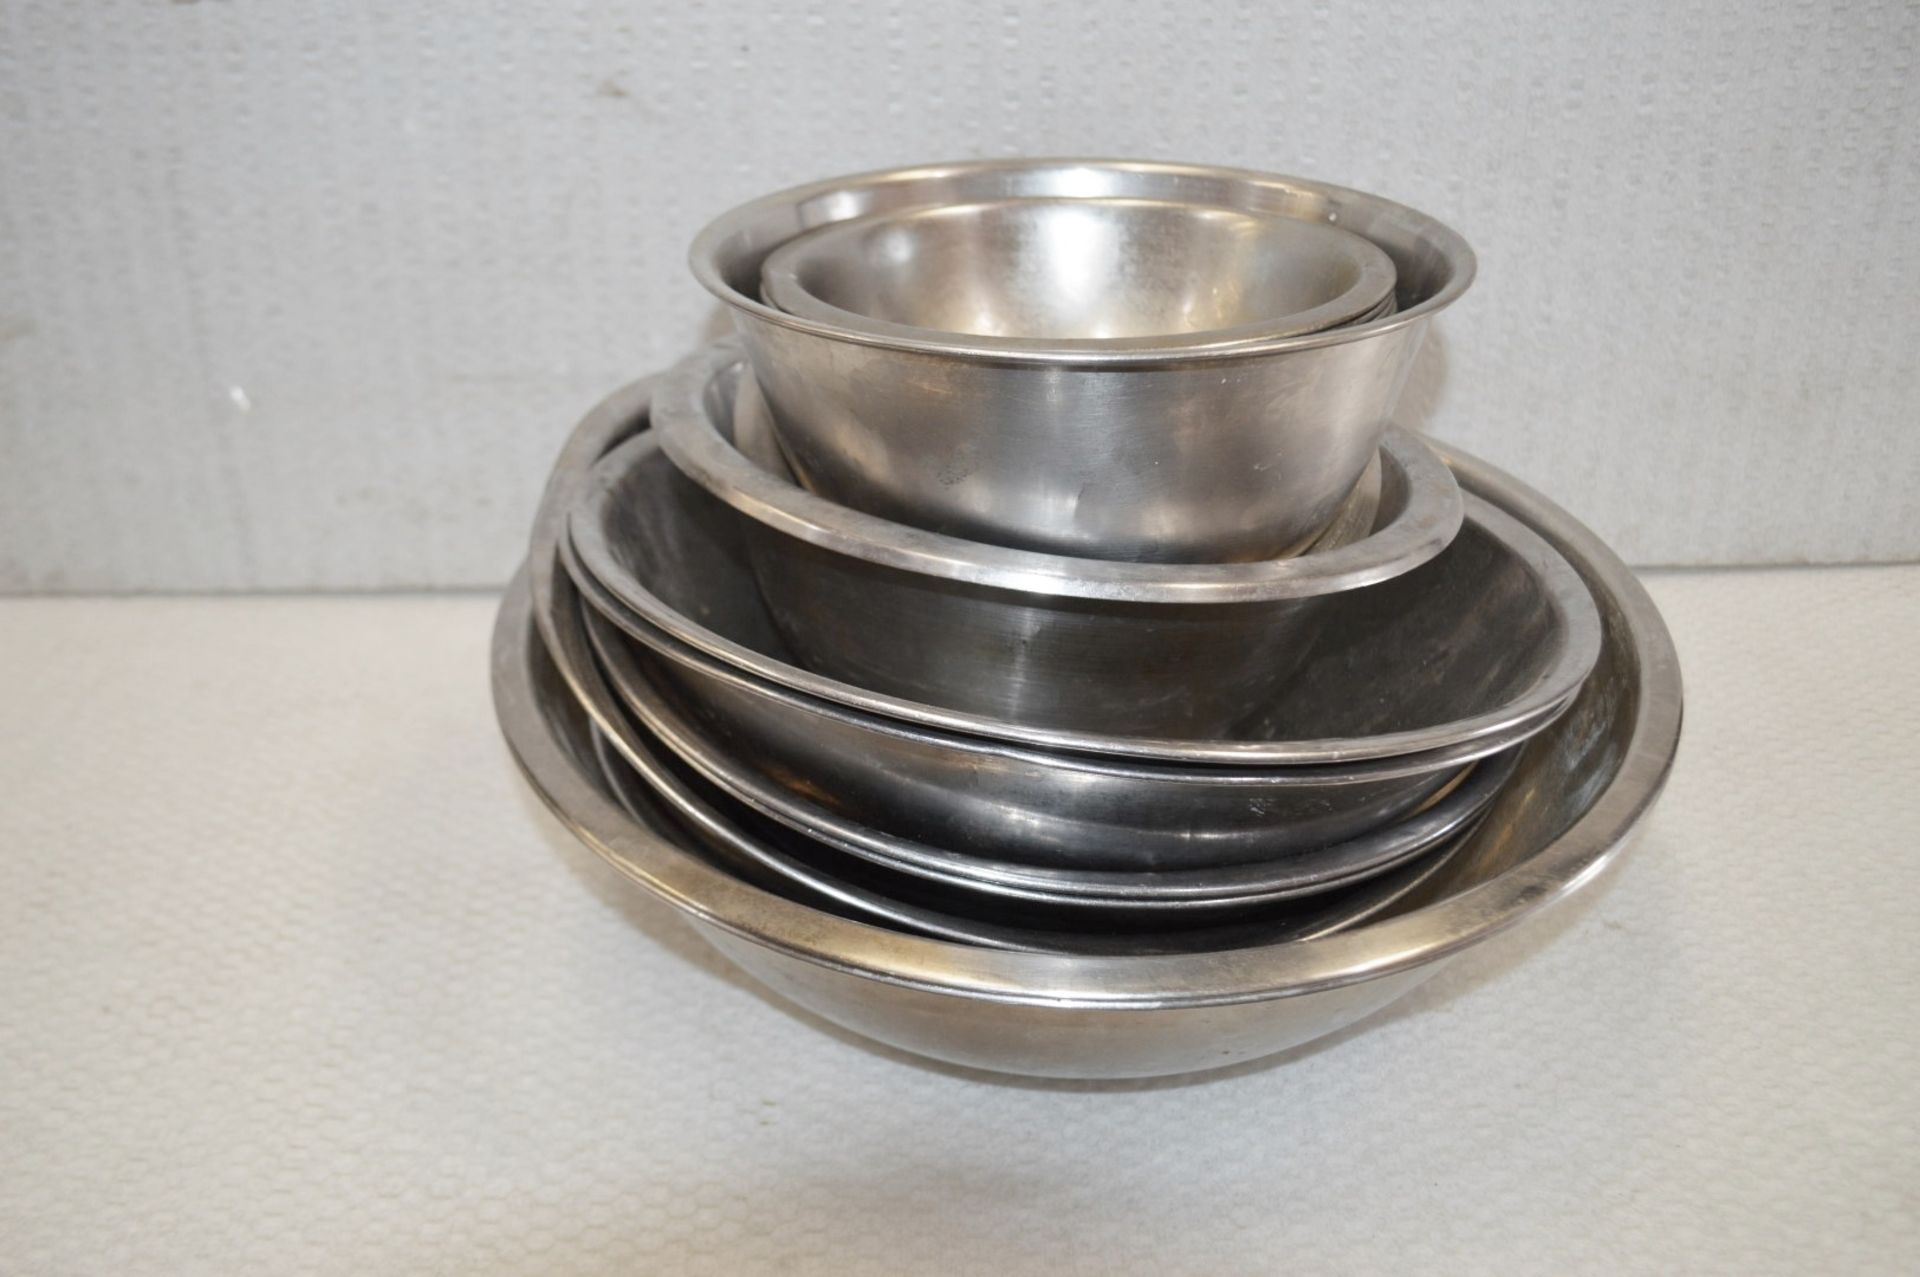 21 x Various Stainless Steel Chefs Mixing/Prep Bowls - Various Sizes Included - Recently Removed - Image 2 of 3